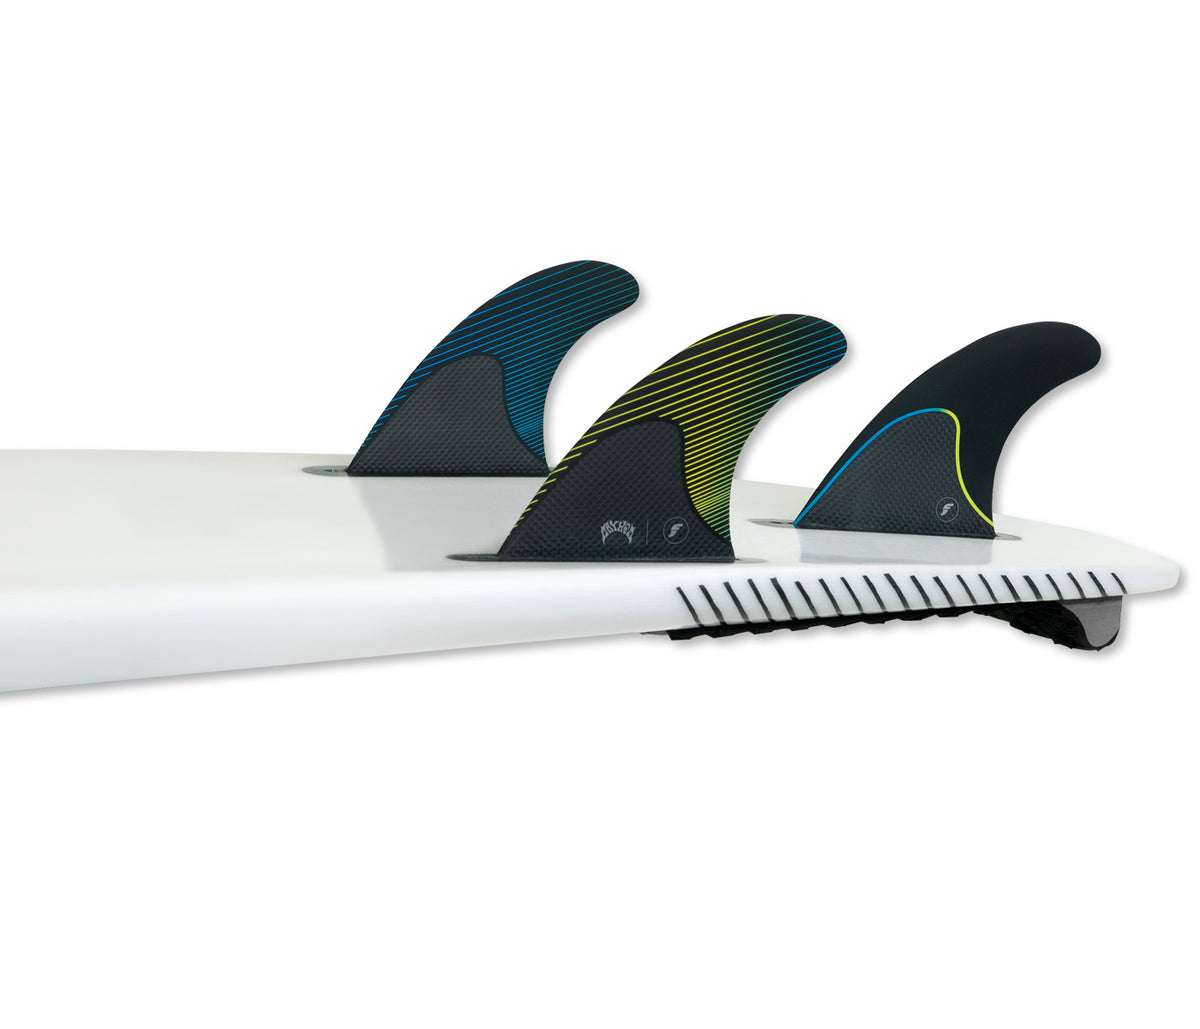 Thruster 3DFins New - Medium Futures Mouthy Surfboard Fins 